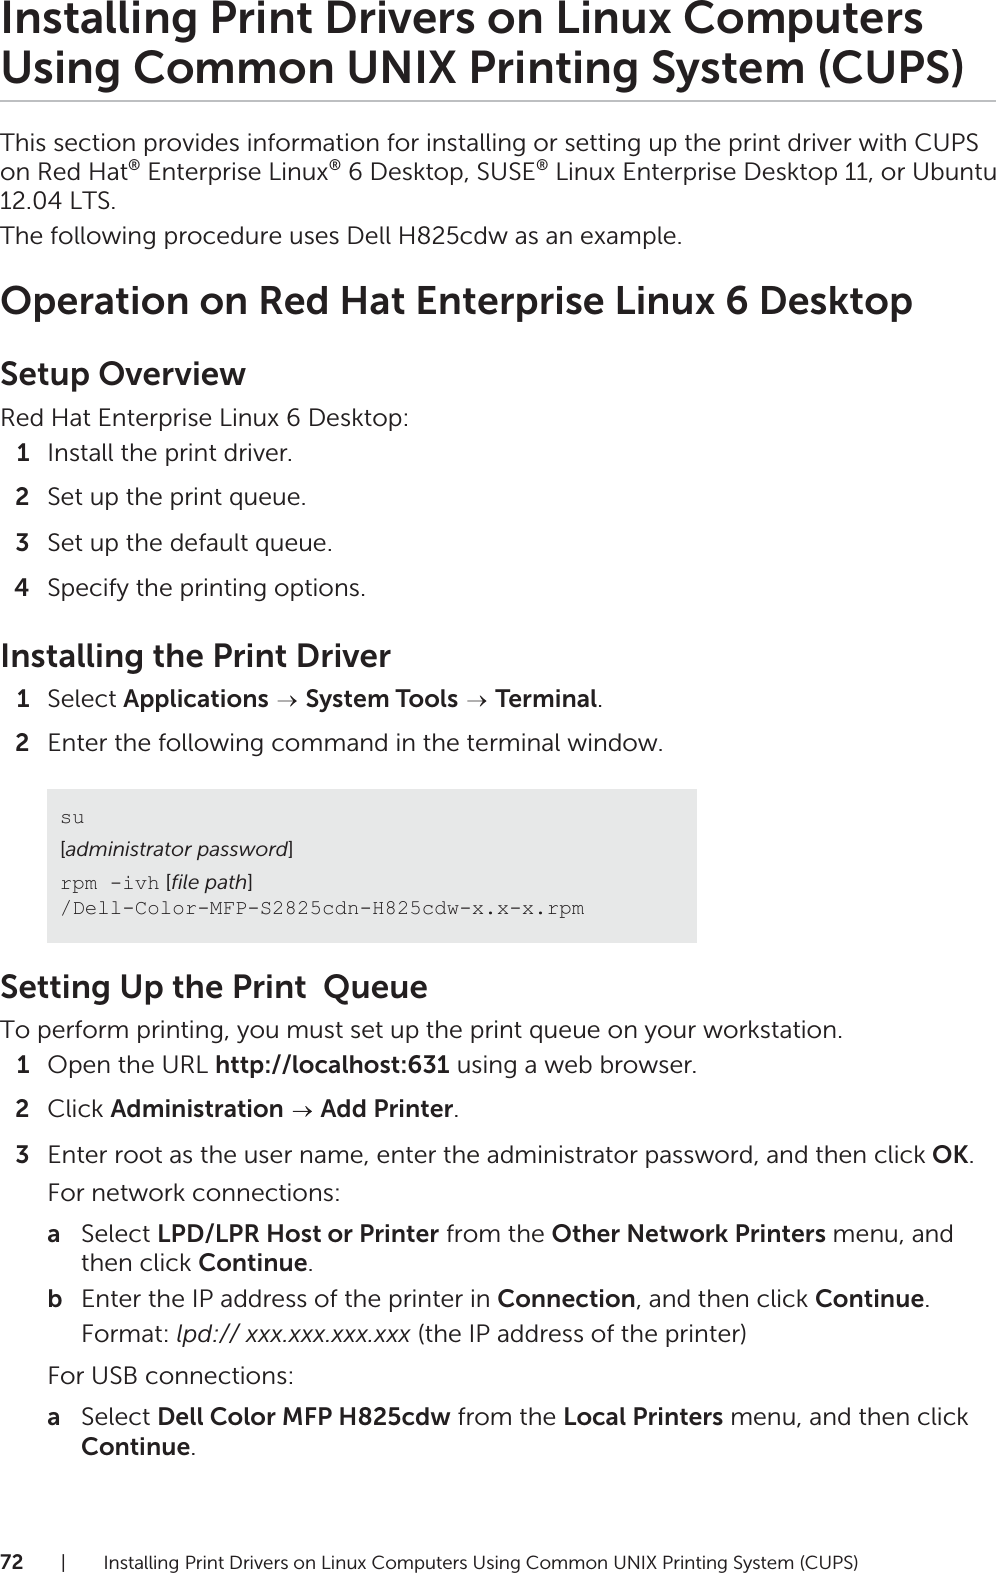 72| Installing Print Drivers on Linux Computers Using Common UNIX Printing System (CUPS)Installing Print Drivers on Linux Computers Using Common UNIX Printing System (CUPS)This section provides information for installing or setting up the print driver with CUPS on Red Hat® Enterprise Linux® 6 Desktop, SUSE® Linux Enterprise Desktop 11, or Ubuntu 12.04 LTS.The following procedure uses Dell H825cdw as an example.Operation on Red Hat Enterprise Linux 6 DesktopSetup OverviewRed Hat Enterprise Linux 6 Desktop:1Install the print driver.2Set up the print queue.3Set up the default queue.4Specify the printing options.Installing the Print Driver1Select Applications  System Tools  Terminal.2Enter the following command in the terminal window.Setting Up the Print  QueueTo perform printing, you must set up the print queue on your workstation.1Open the URL http://localhost:631 using a web browser.2Click Administration  Add Printer.3Enter root as the user name, enter the administrator password, and then click OK.For network connections:aSelect LPD/LPR Host or Printer from the Other Network Printers menu, and then click Continue.bEnter the IP address of the printer in Connection, and then click Continue.Format: lpd:// xxx.xxx.xxx.xxx (the IP address of the printer)For USB connections:aSelect Dell Color MFP H825cdw from the Local Printers menu, and then click Continue.su[administrator password]rpm -ivh [file path] /Dell-Color-MFP-S2825cdn-H825cdw-x.x-x.rpm